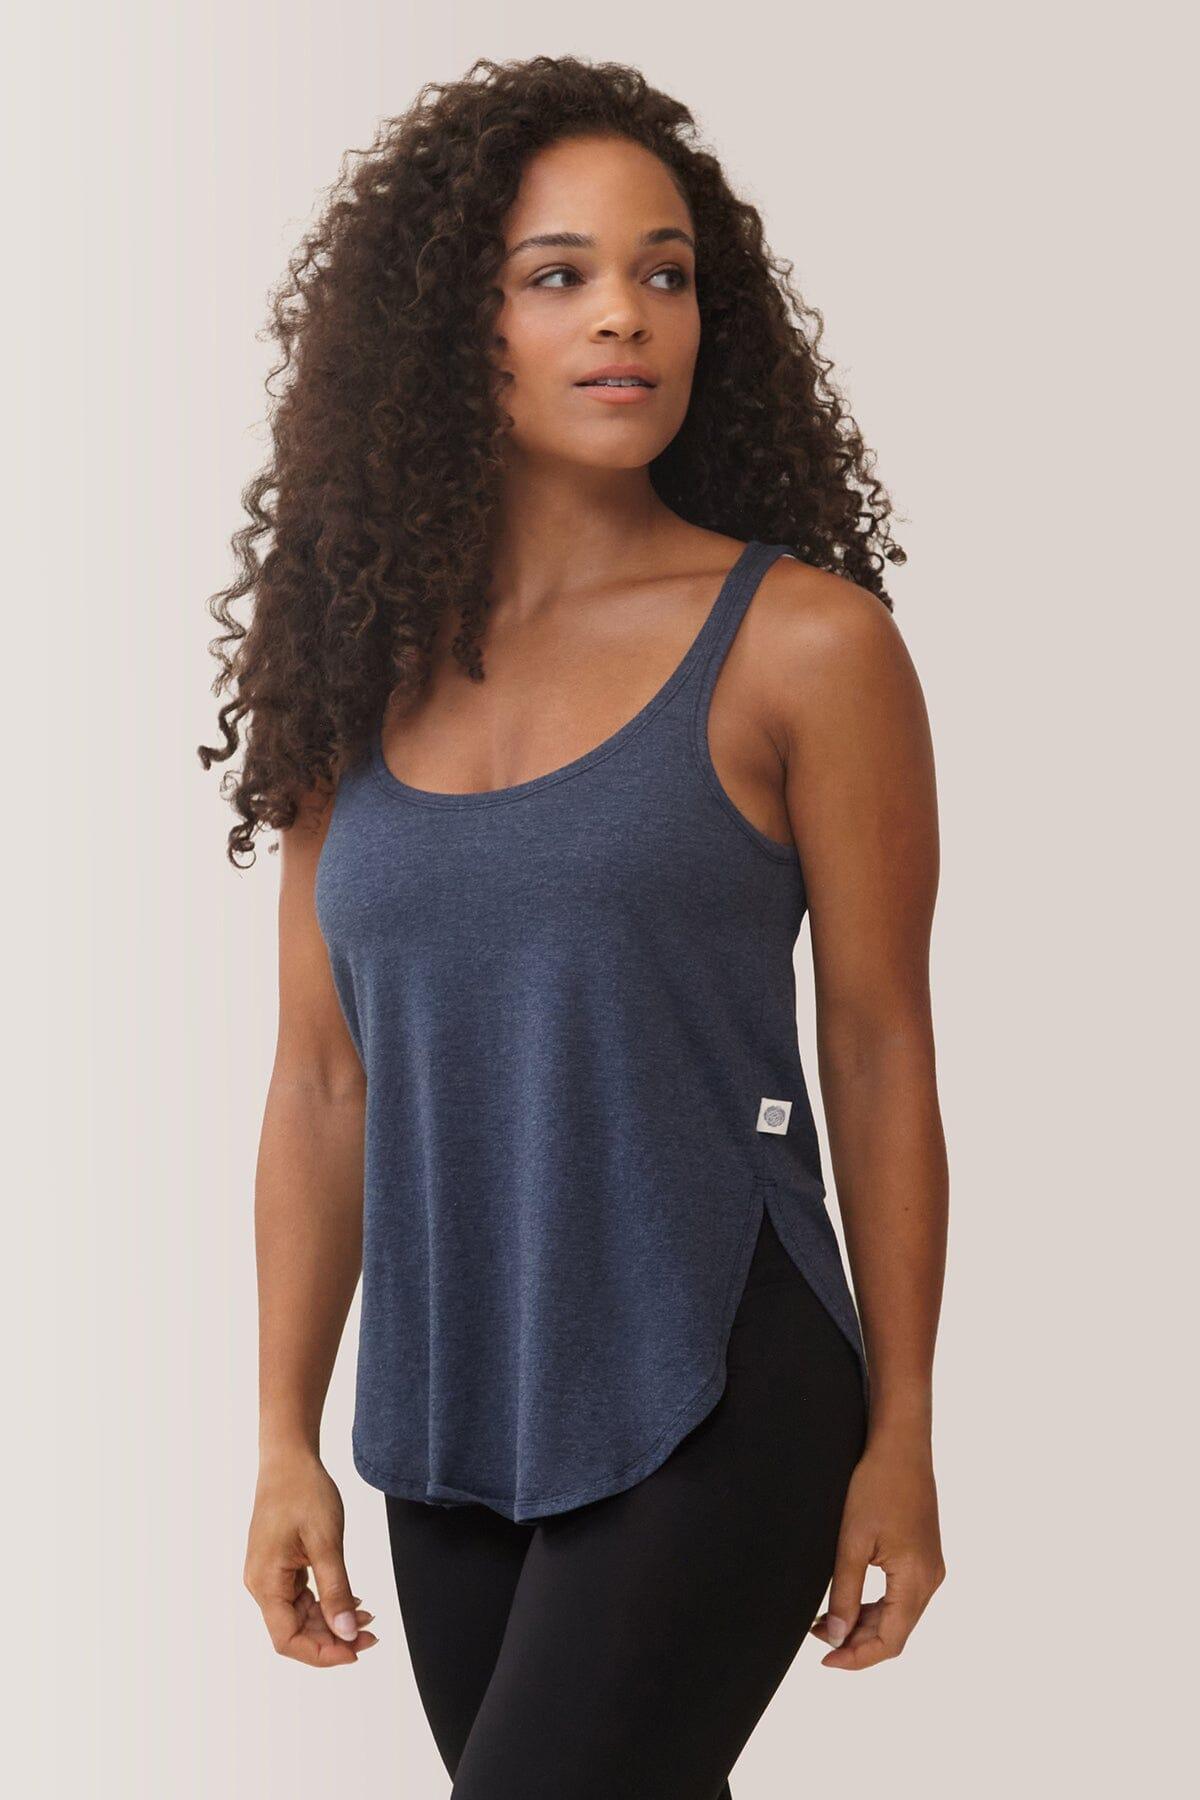 Femme qui porte la camisole Hello Gorgeous! de Rose Boreal./ Women wearing the Hello Gorgeous! Tank Top from Rose Boreal. -Midnight / Minuit